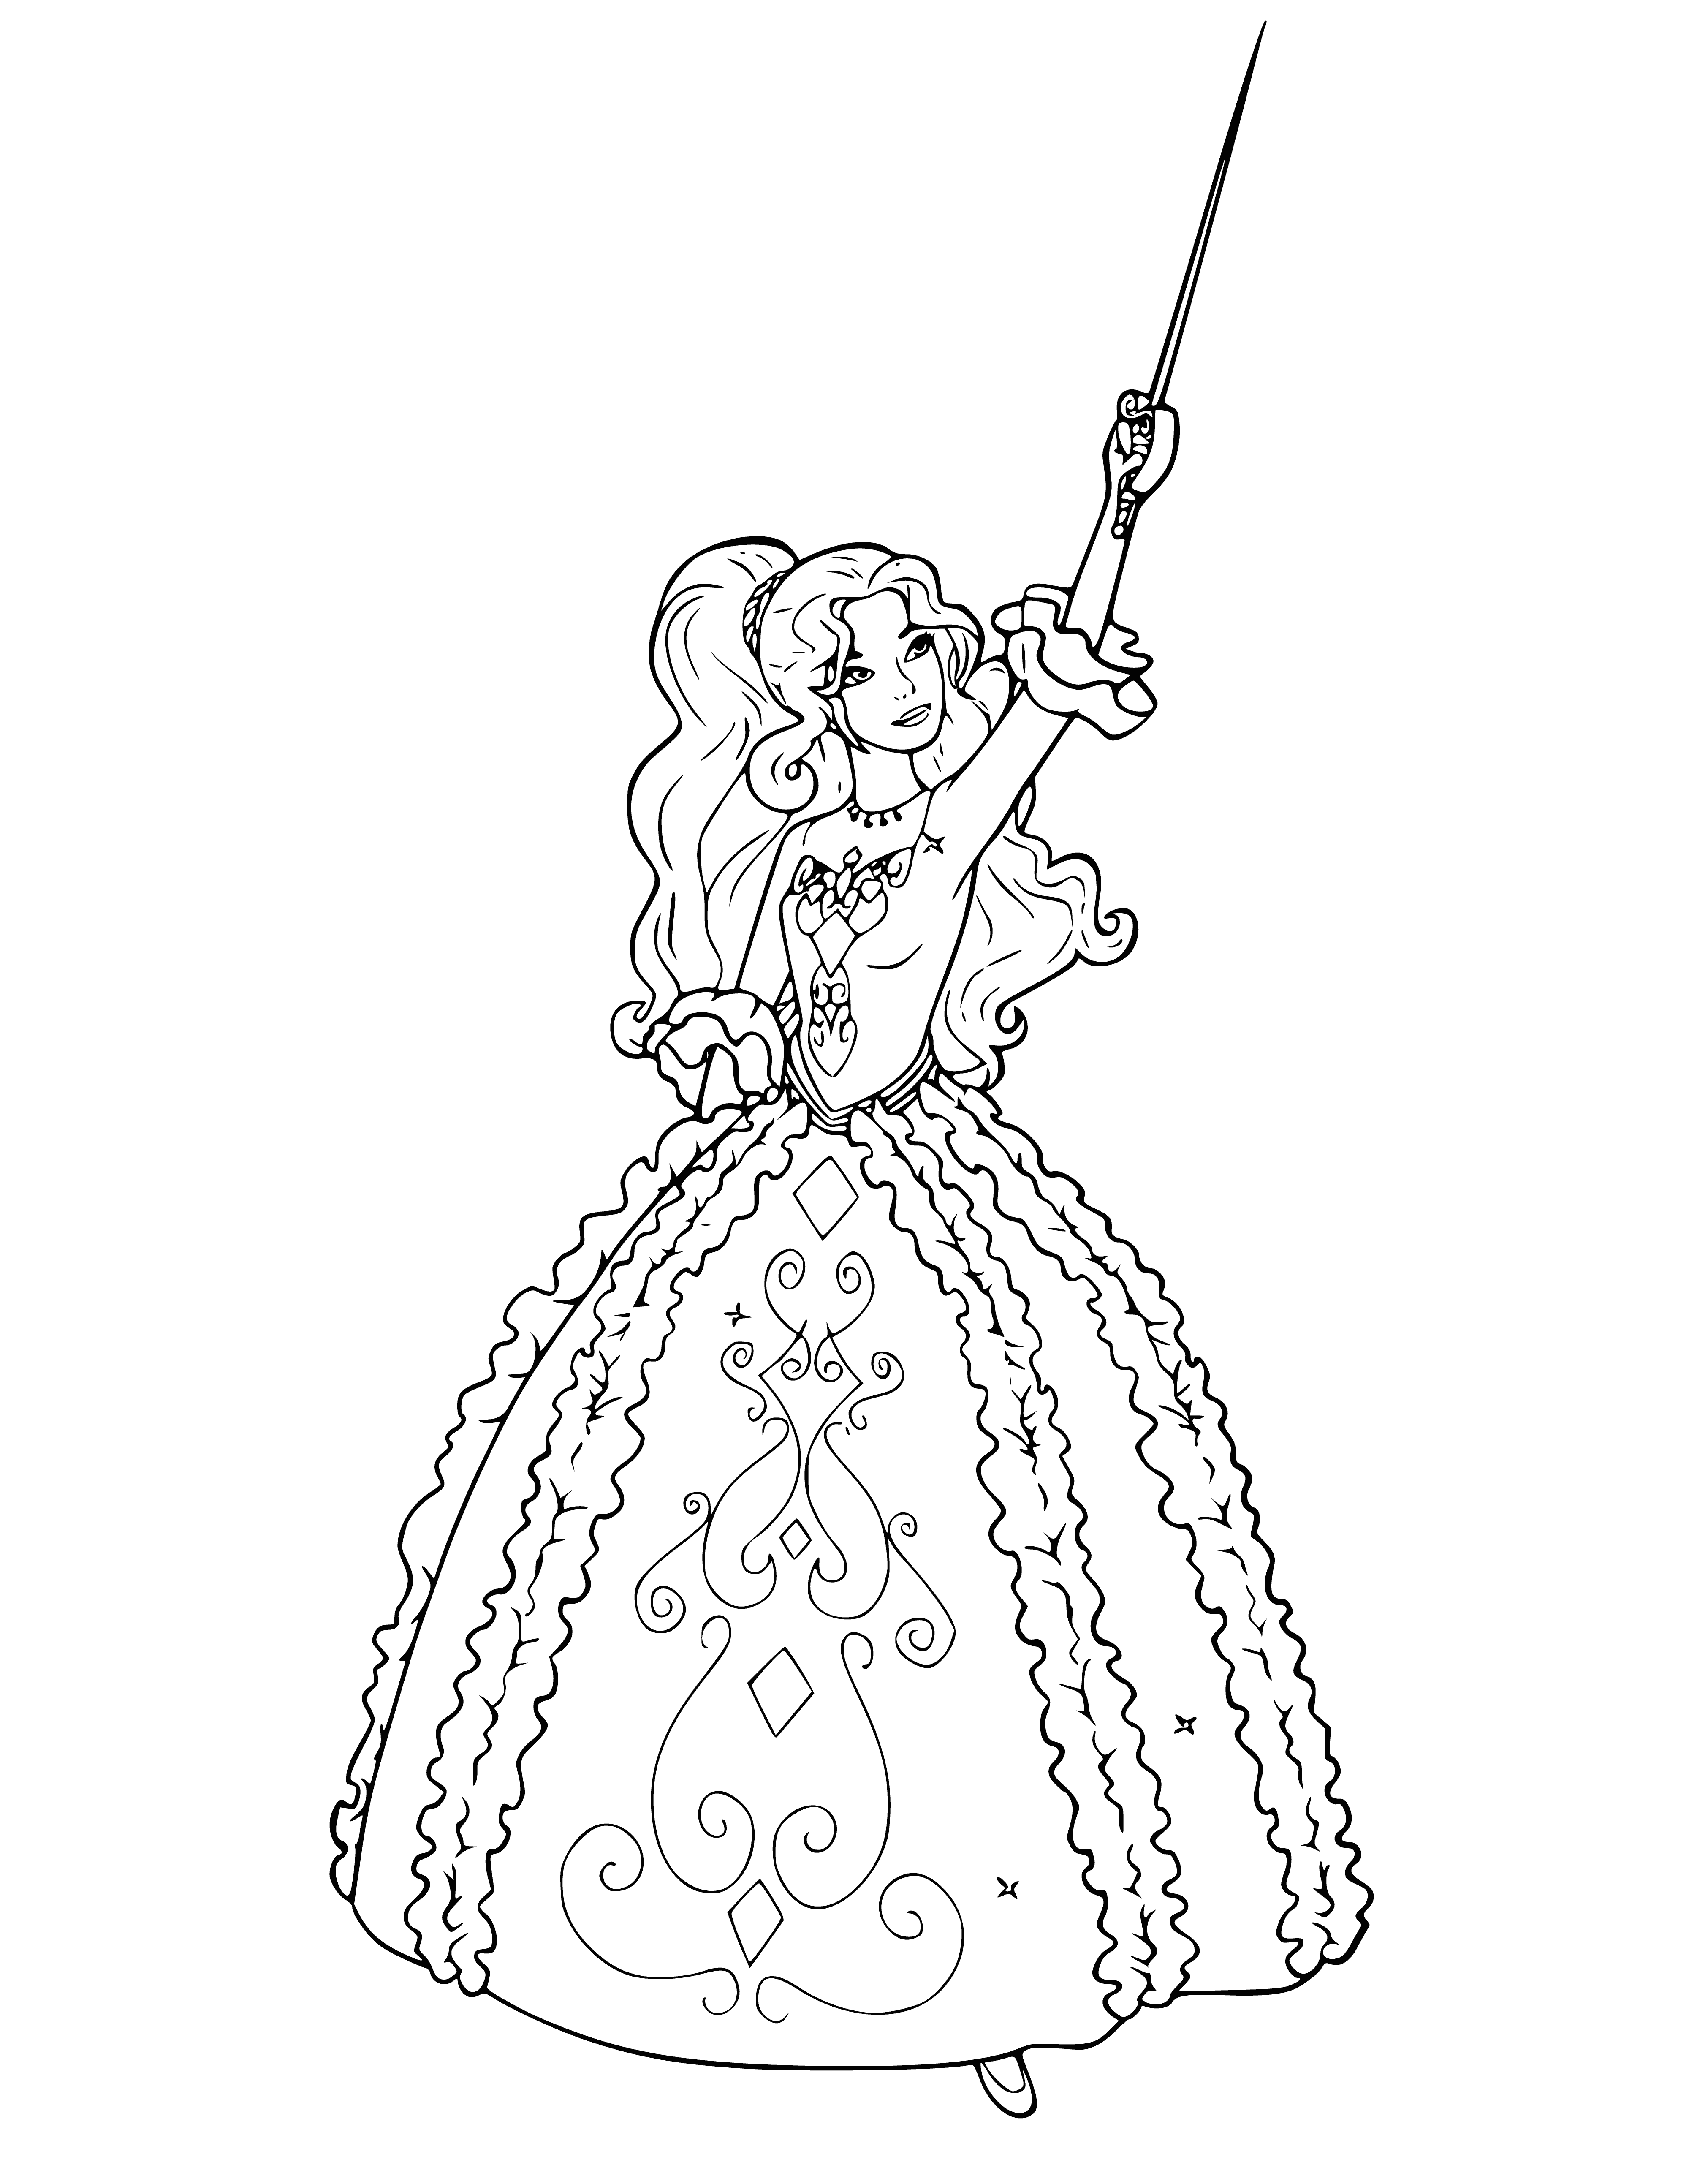 Barbie in a fluffy dress and with a sword coloring page